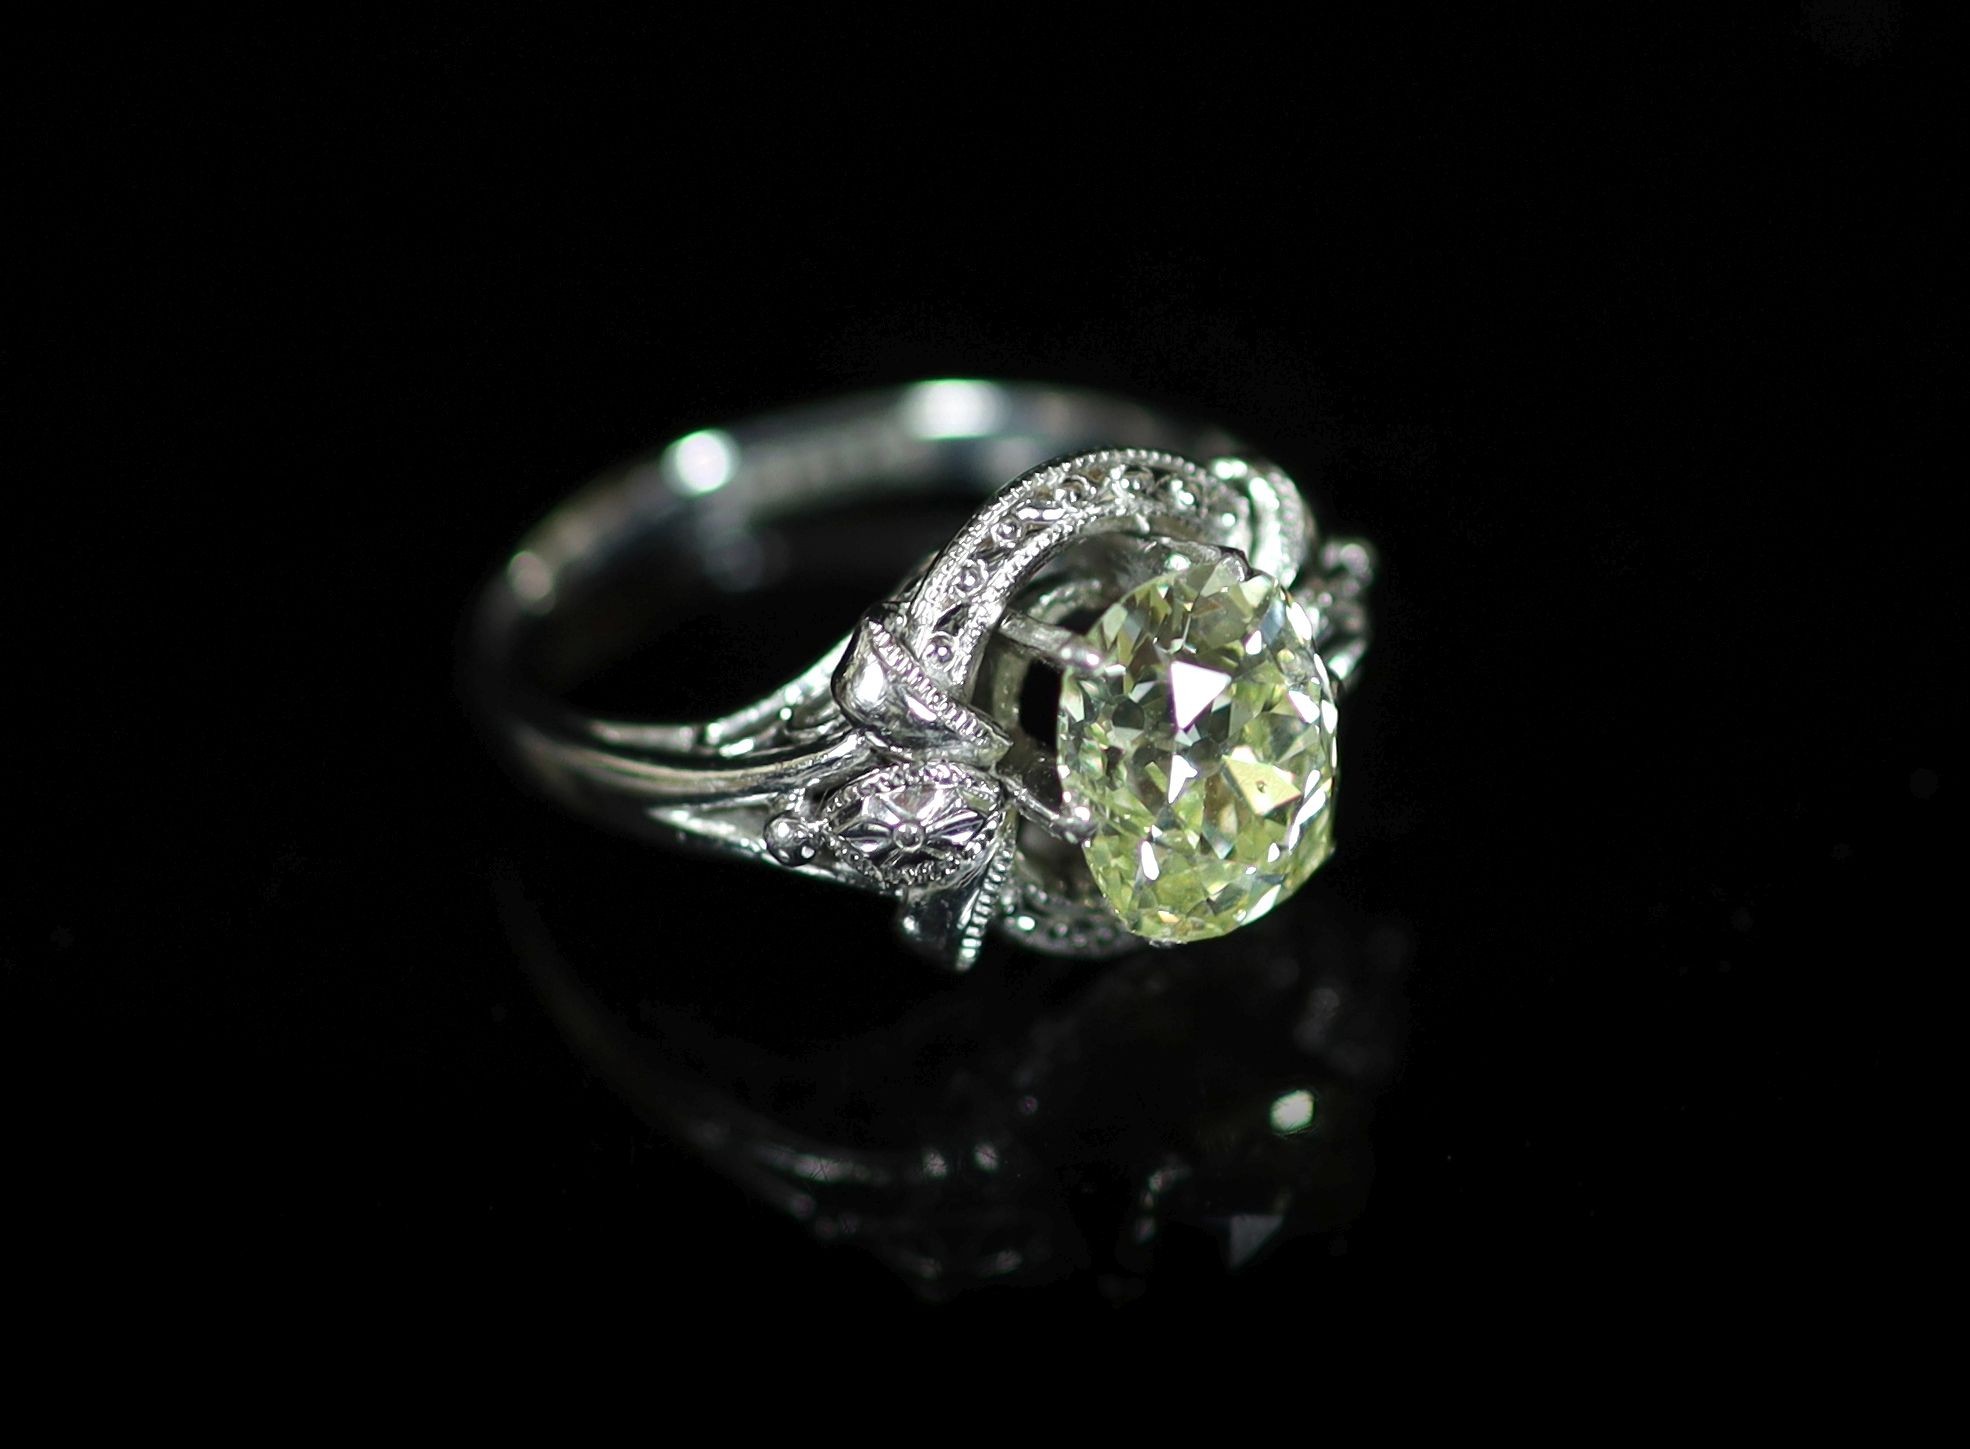 A white gold and oval cut solitaire diamond ring, in a raised claw setting